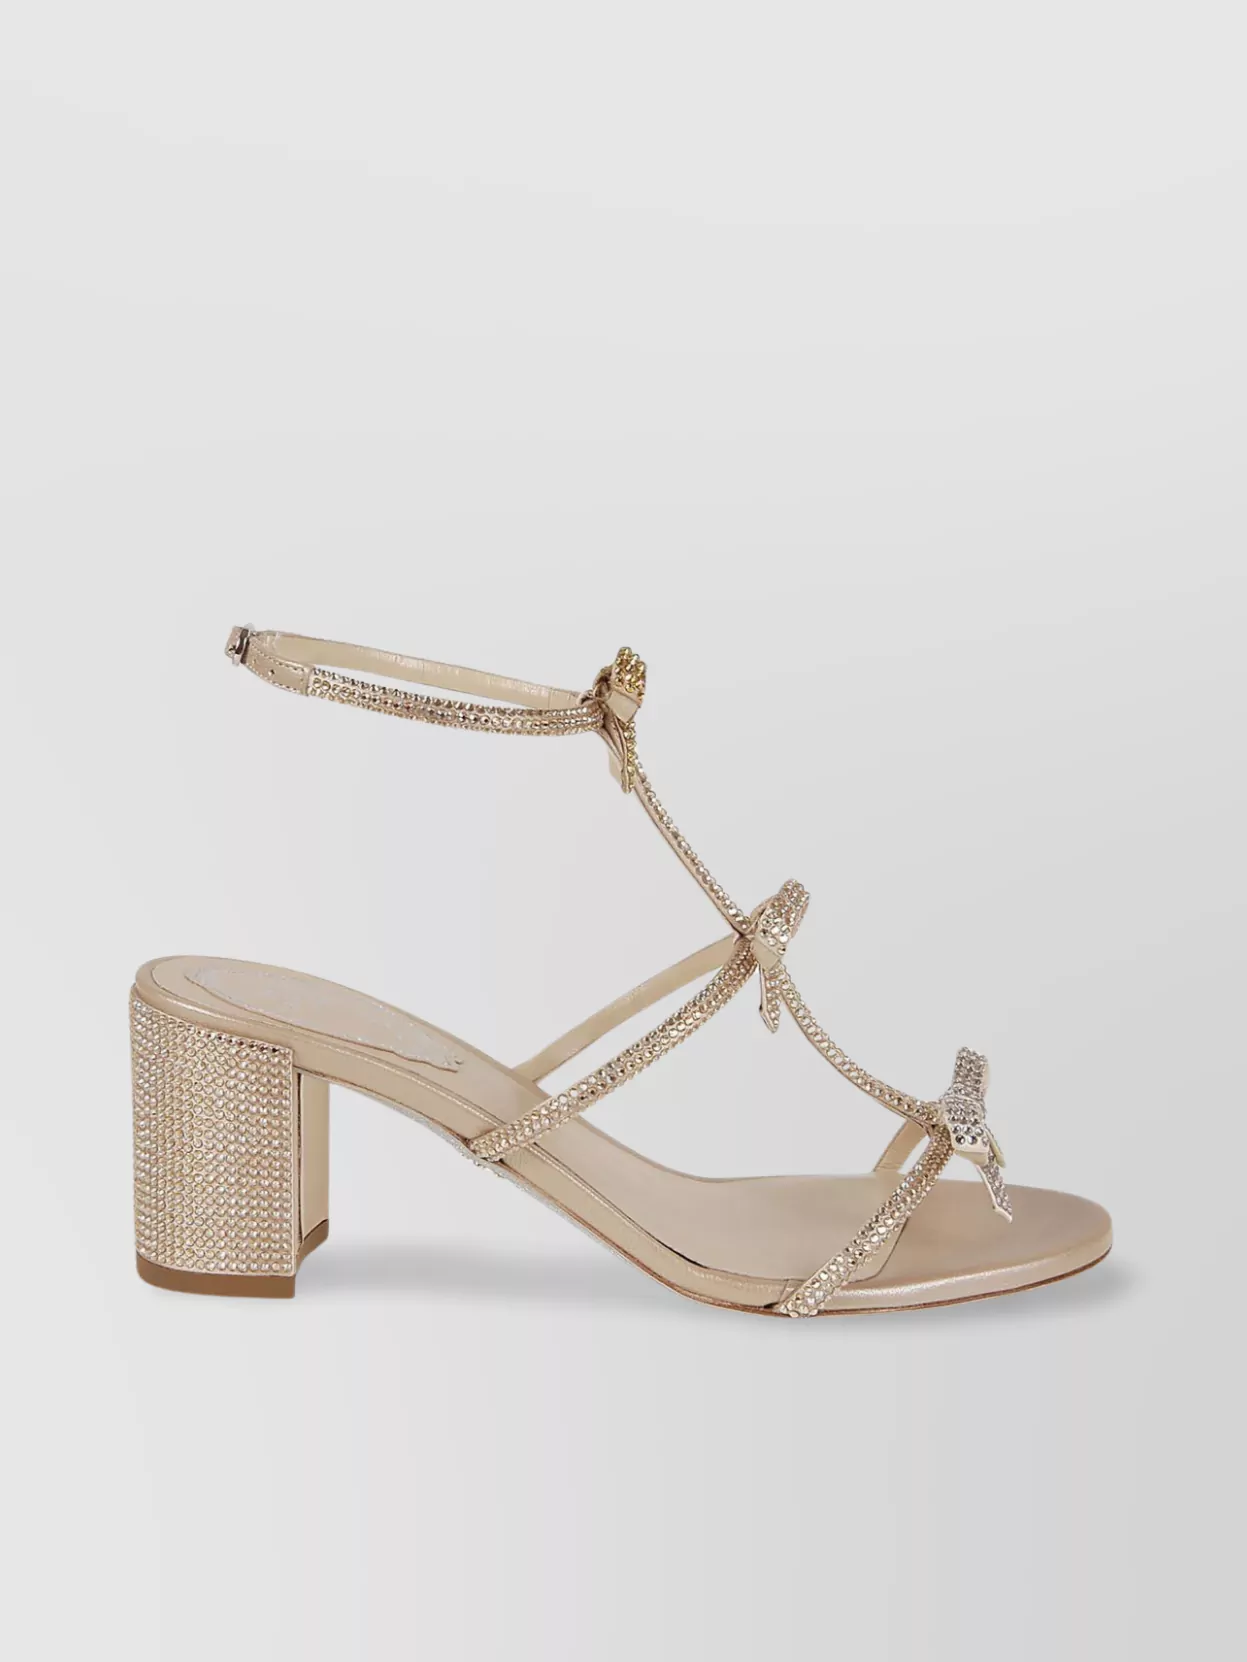 Shop René Caovilla Sandal With High Heel And Embellished Bow Accents In Beige